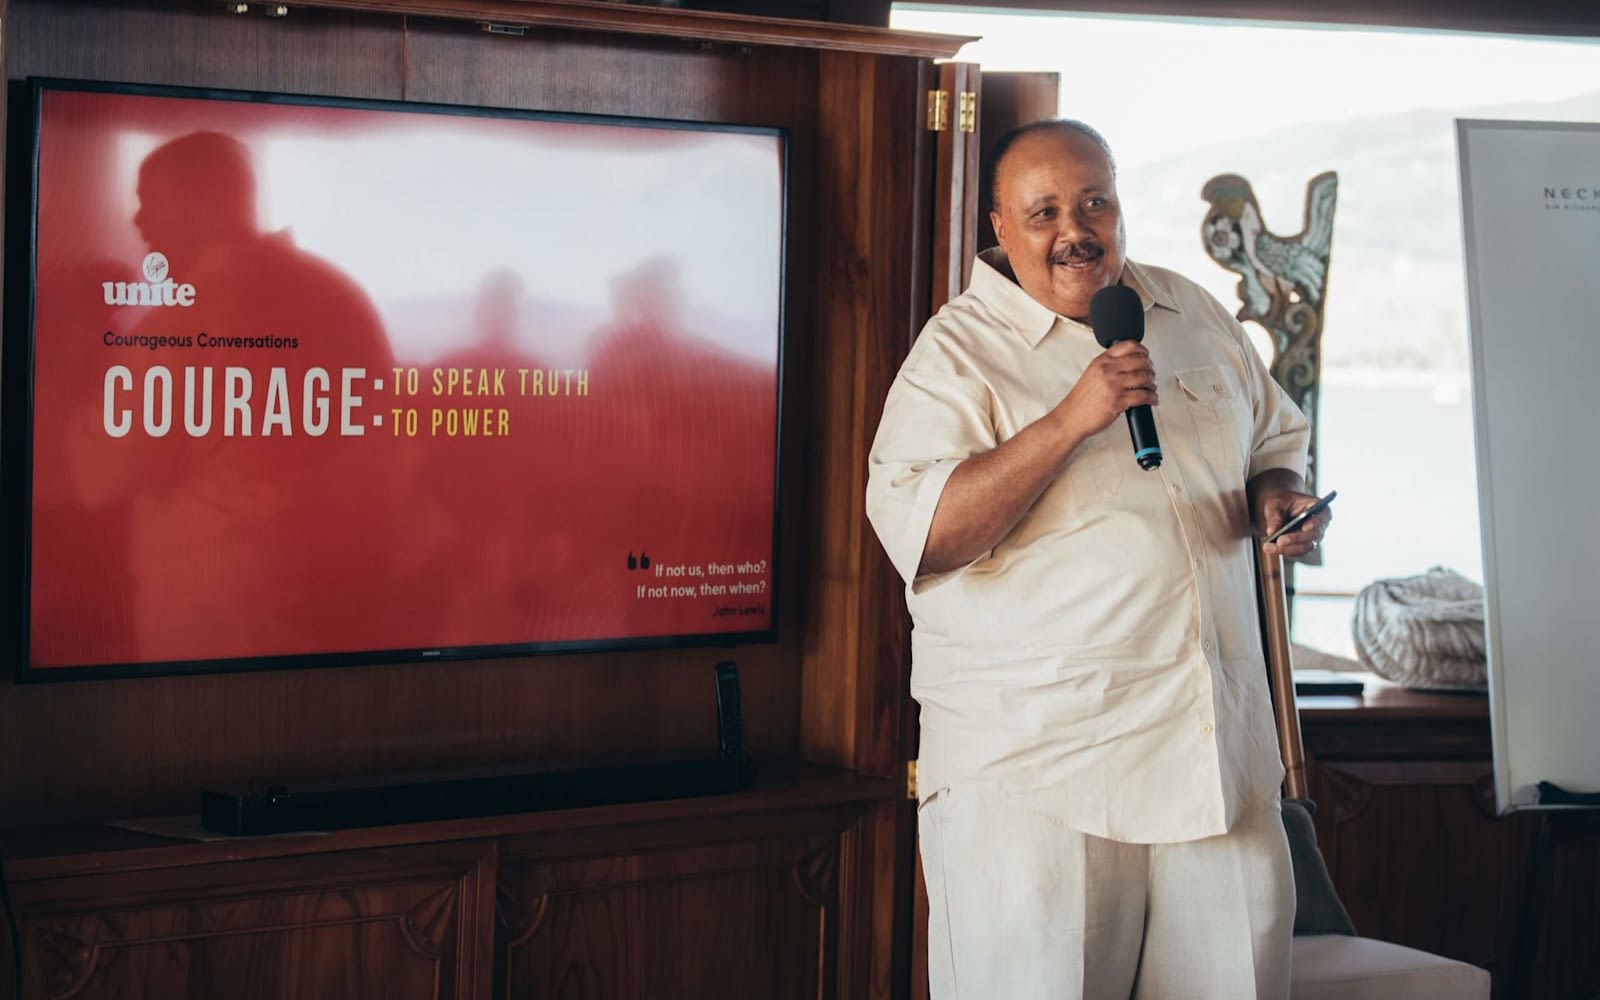 Martin Luther King III speaking at a Virgin Unite event on Necker Island wearing a cream shortsleeve shirt and trousers